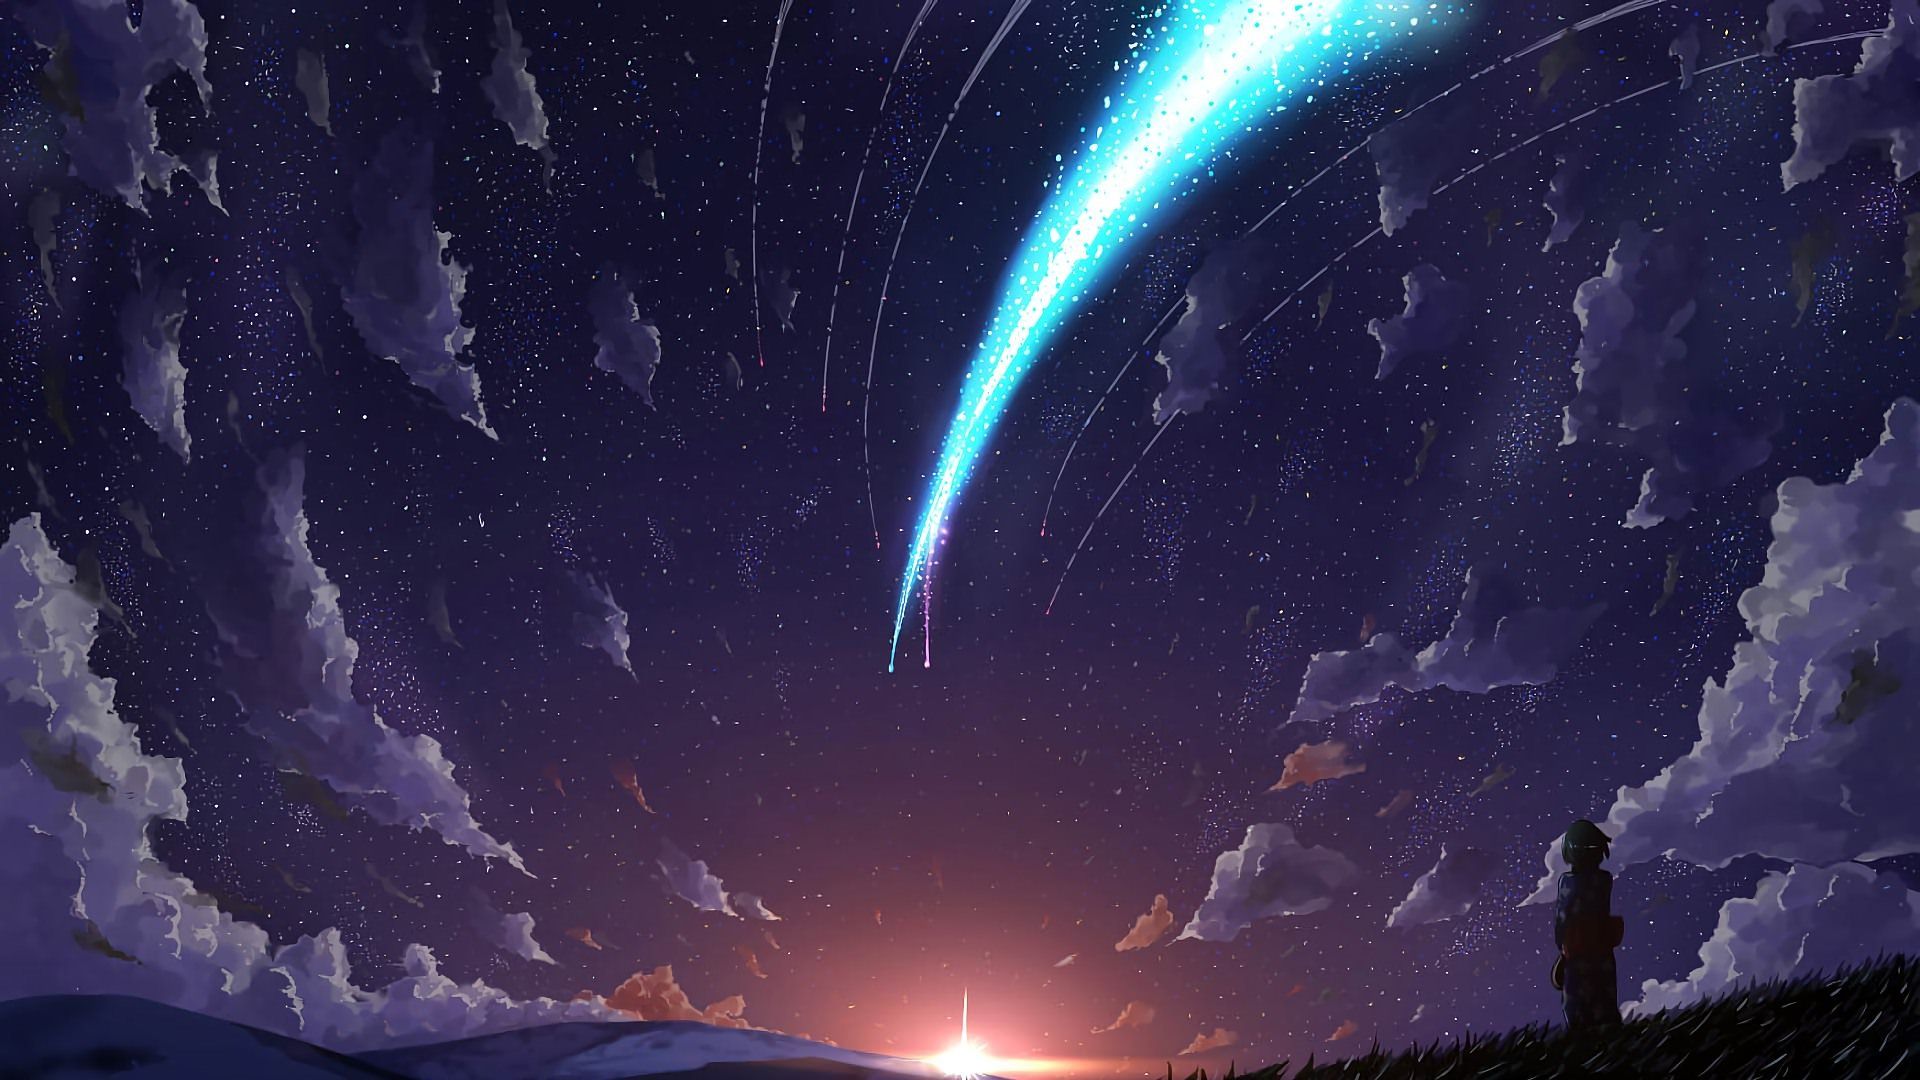 Your Name Wallpaper 4k PC